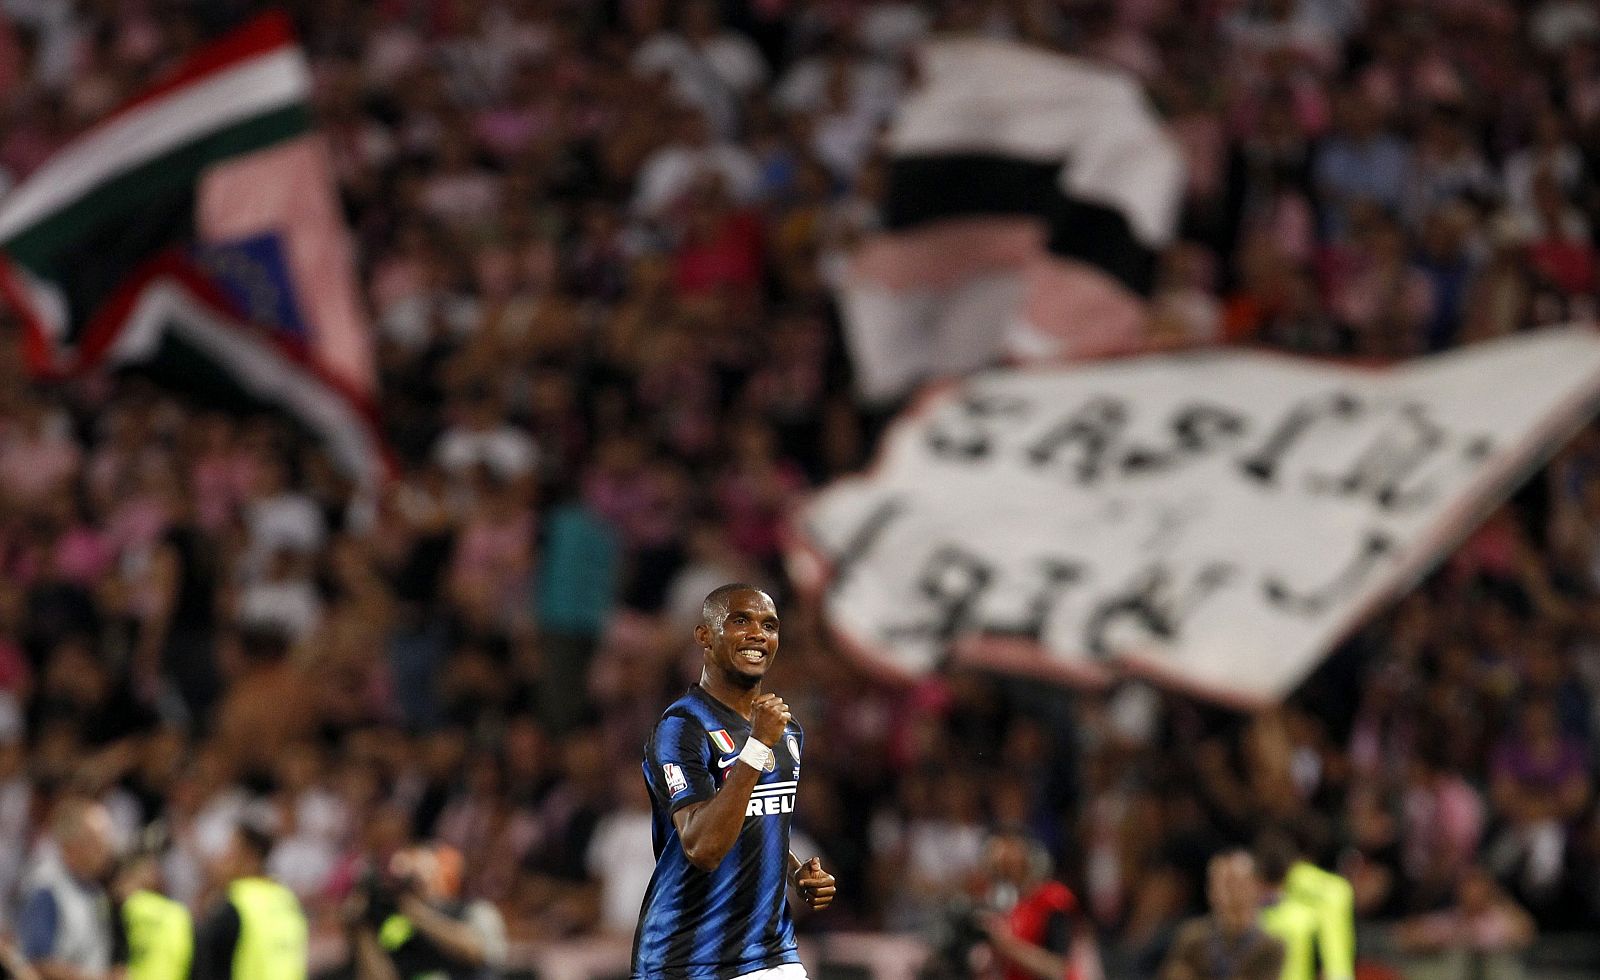 Inter Milan's Samuel Eto'o celebrates after scoring against Palermo during their Italian Cup final soccer match in Rome